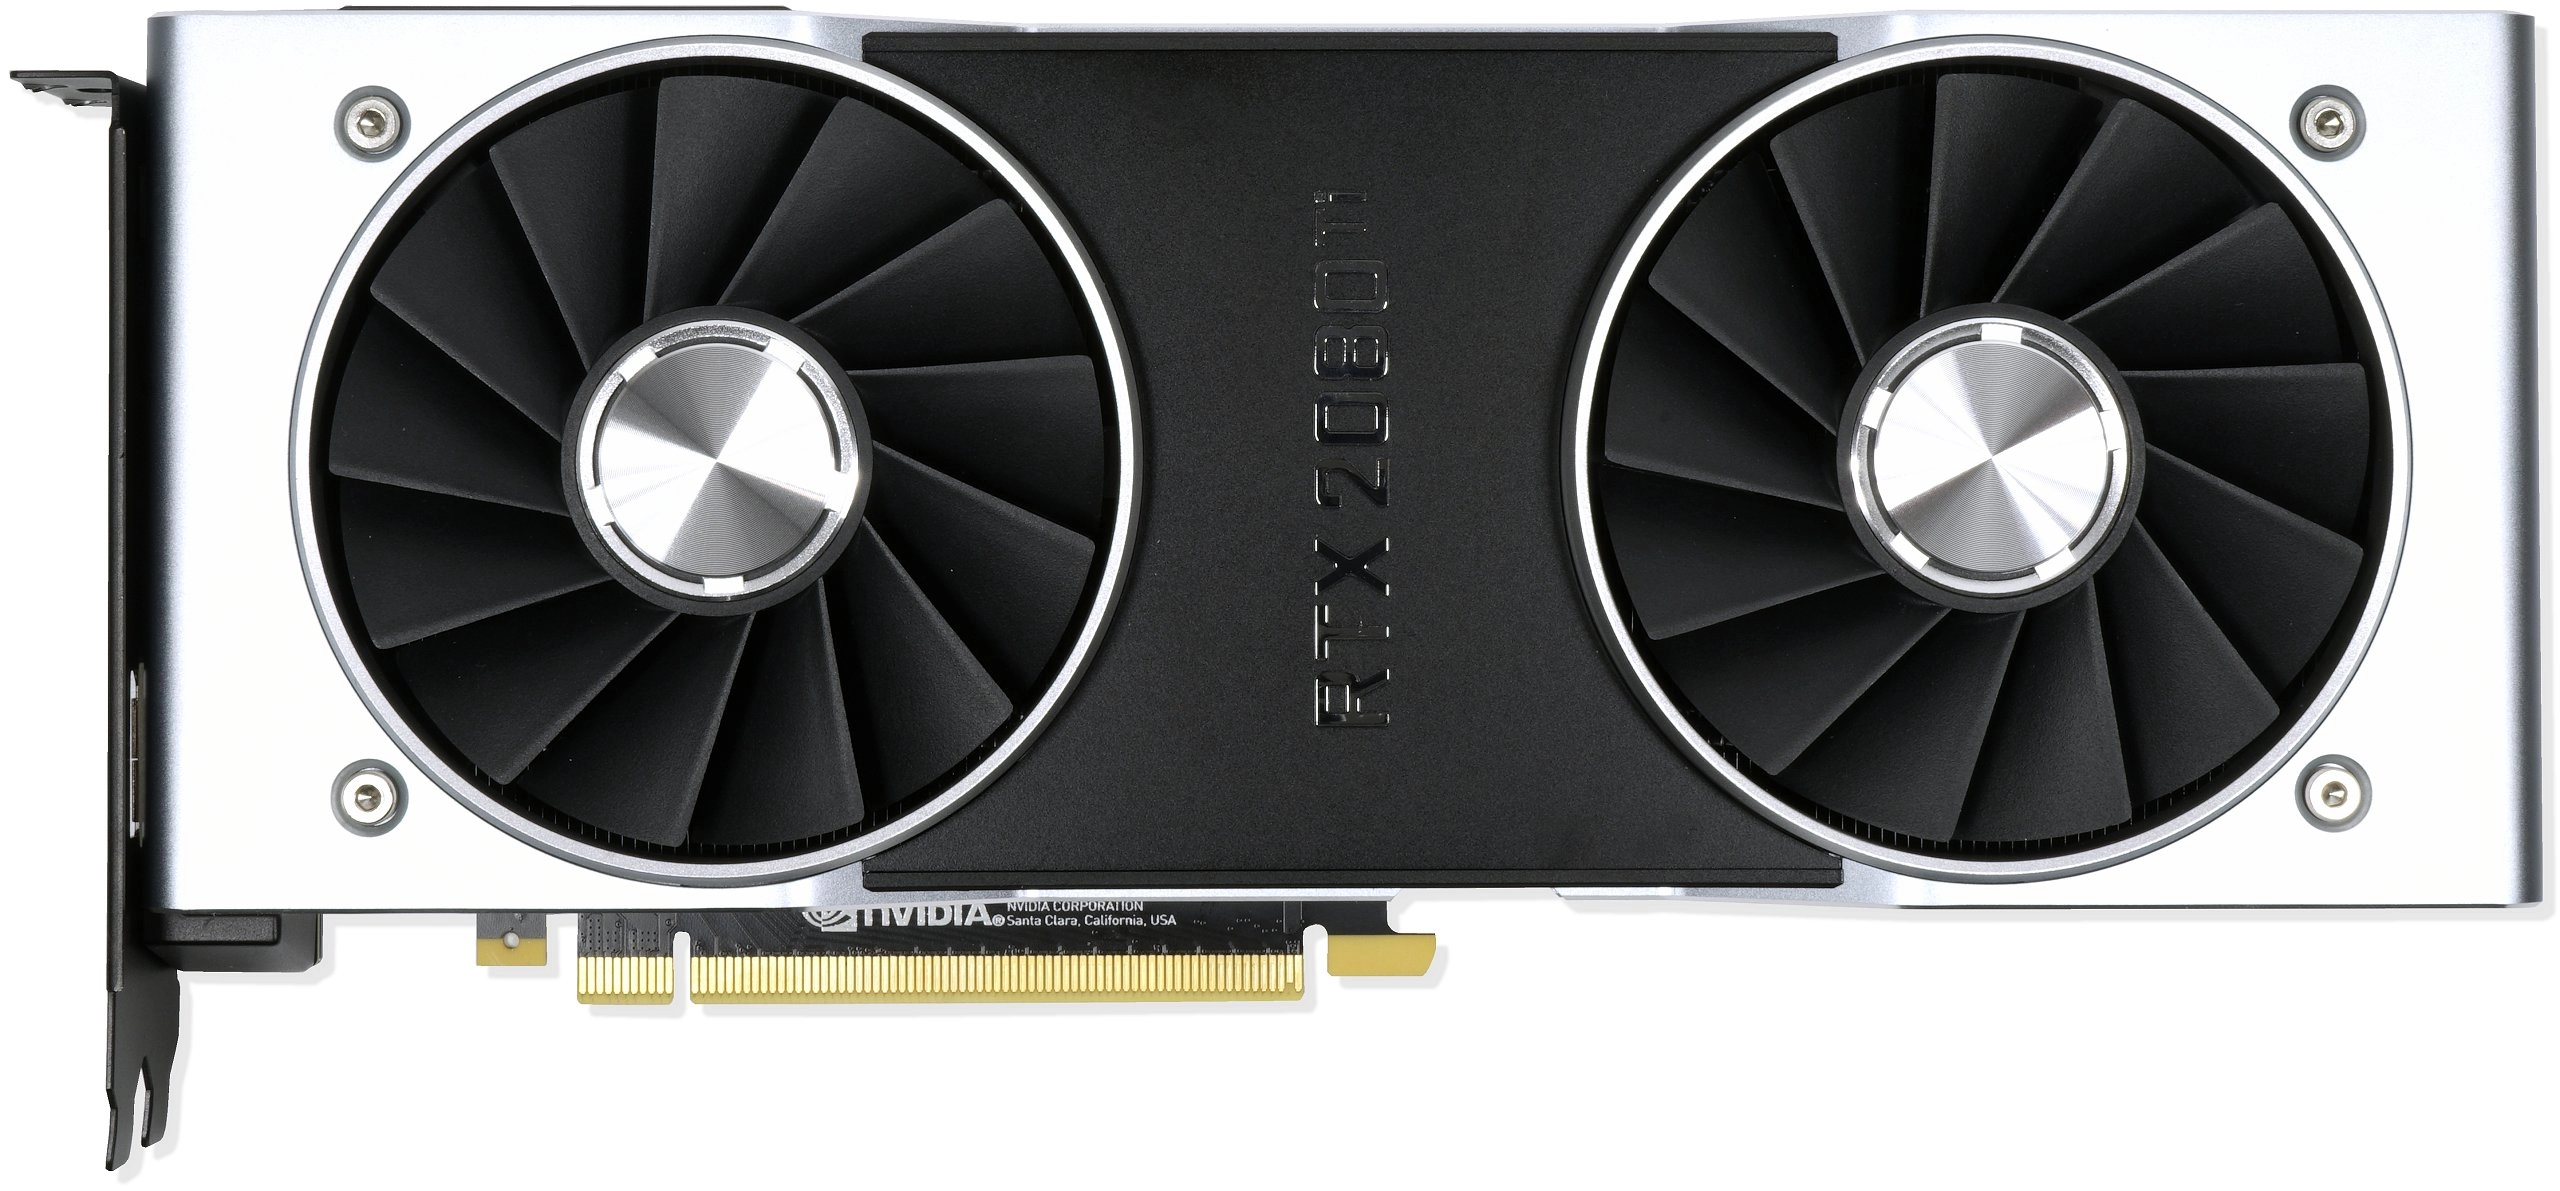 Nvidia GeForce RTX 2080 Ti Founders Edition Image